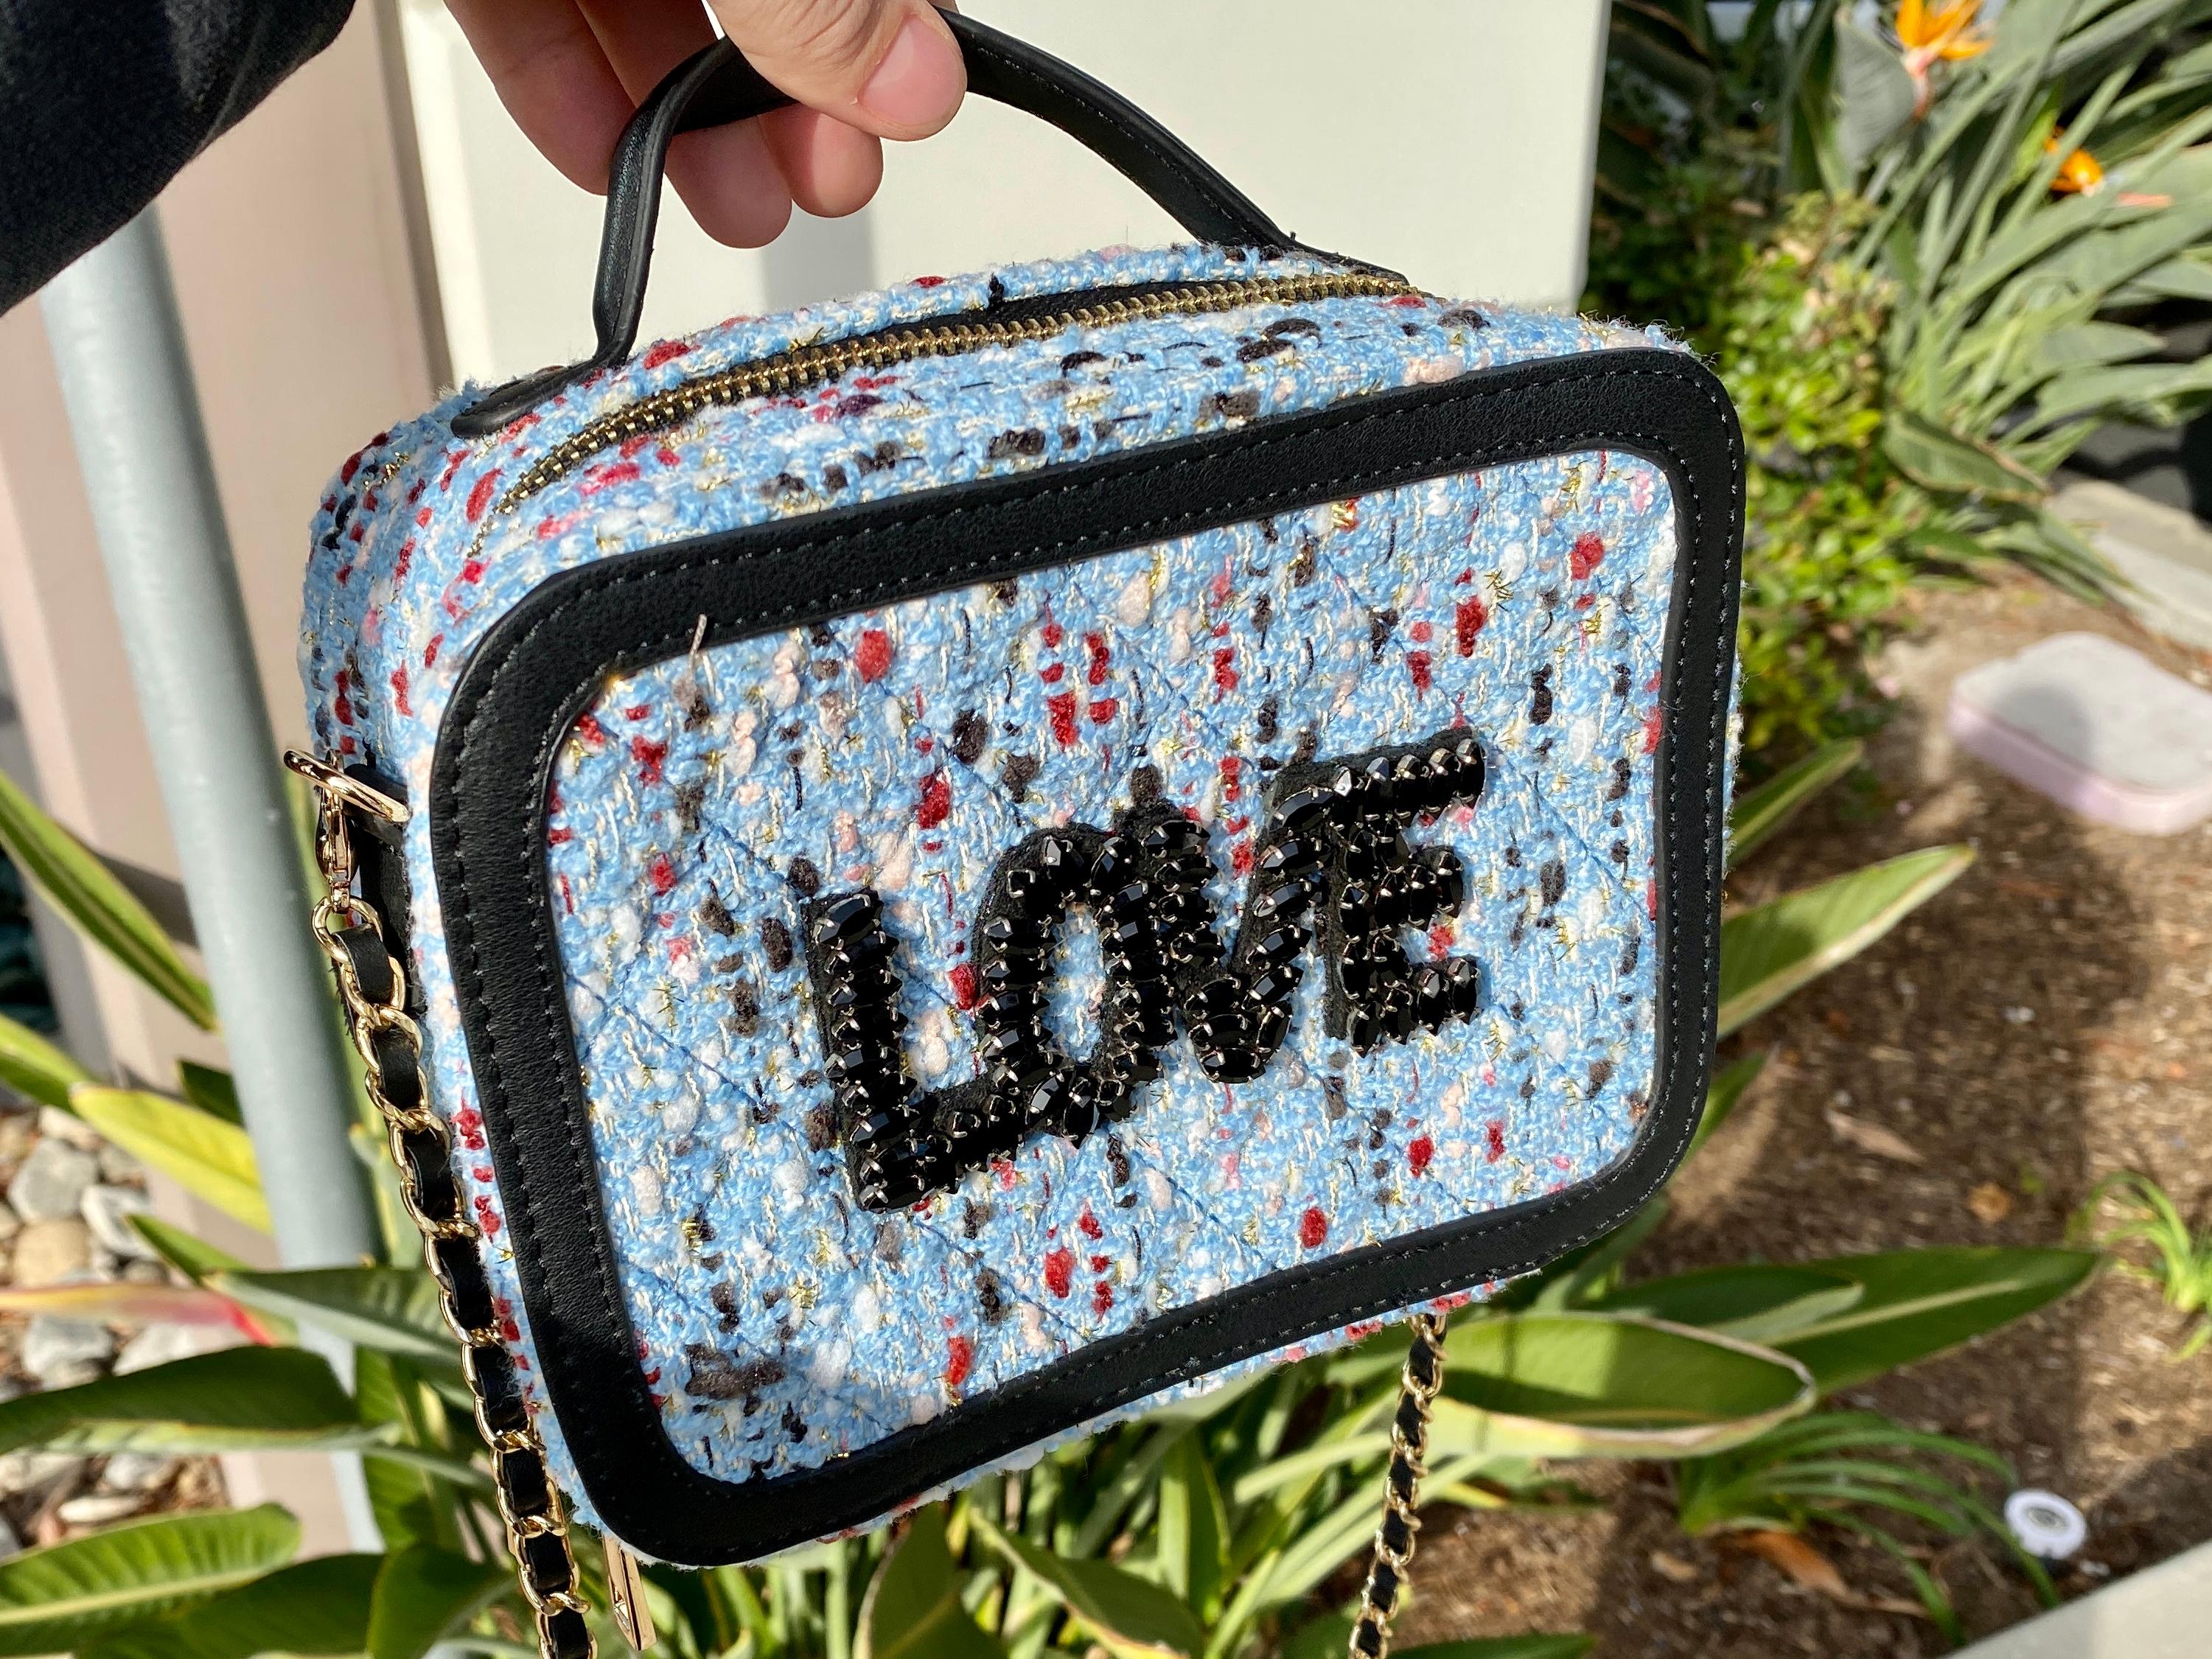 DESCRIPTION
Beaded letters on exterior 
Dual zipper closure
Single top handle
Removable woven faux leather chain strap
Double compartment interior
Interior zippered pocket

Measurements:
Length: 8in / 20.32cm
Width: 4in / 10.16cm
Height: 6in /